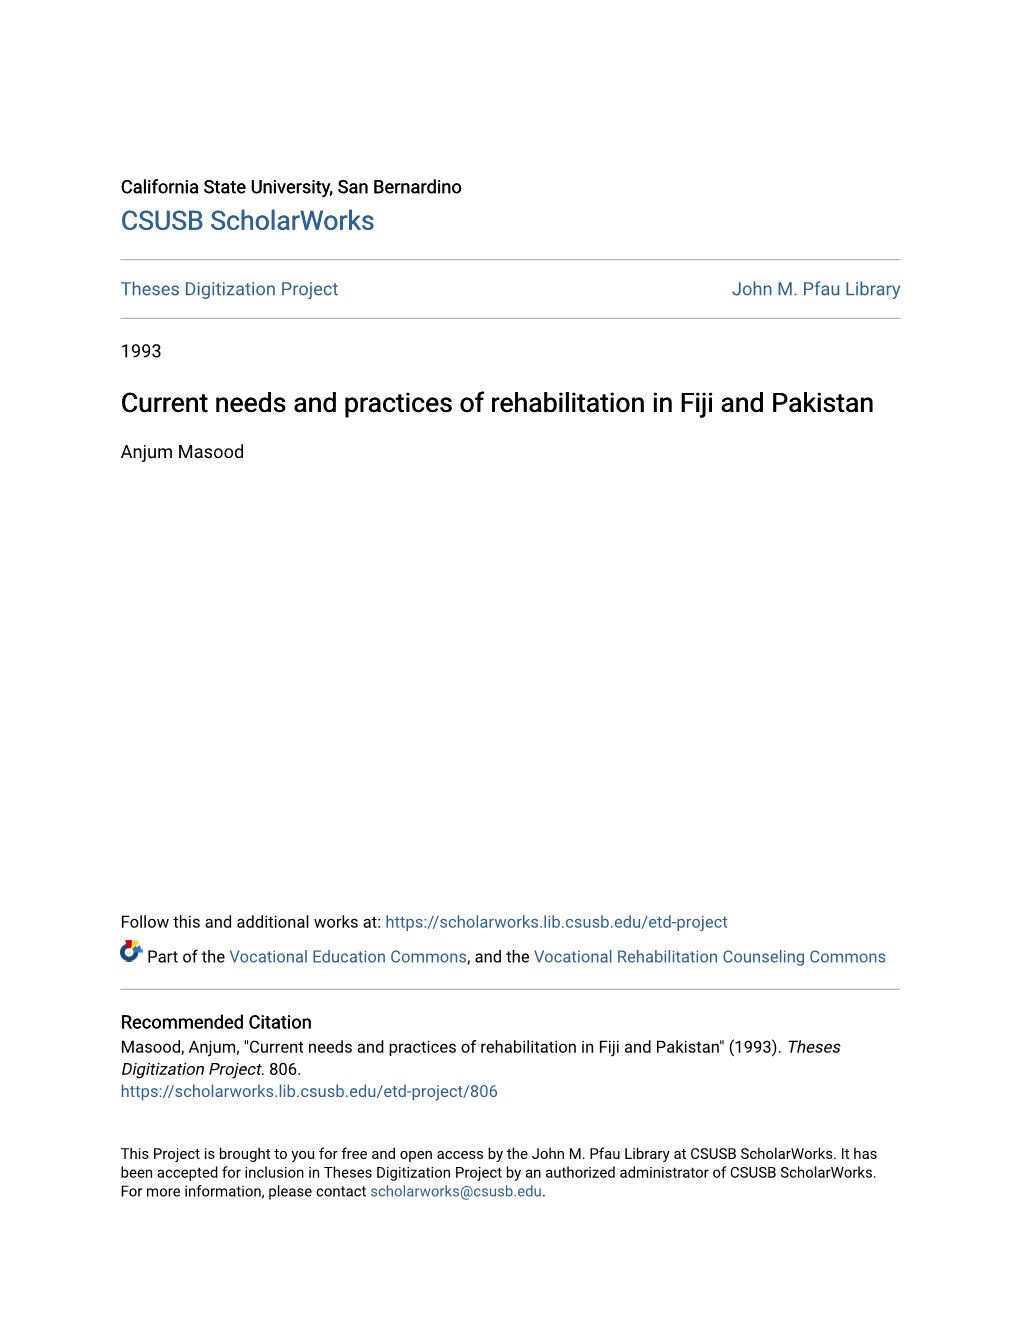 Current Needs and Practices of Rehabilitation in Fiji and Pakistan